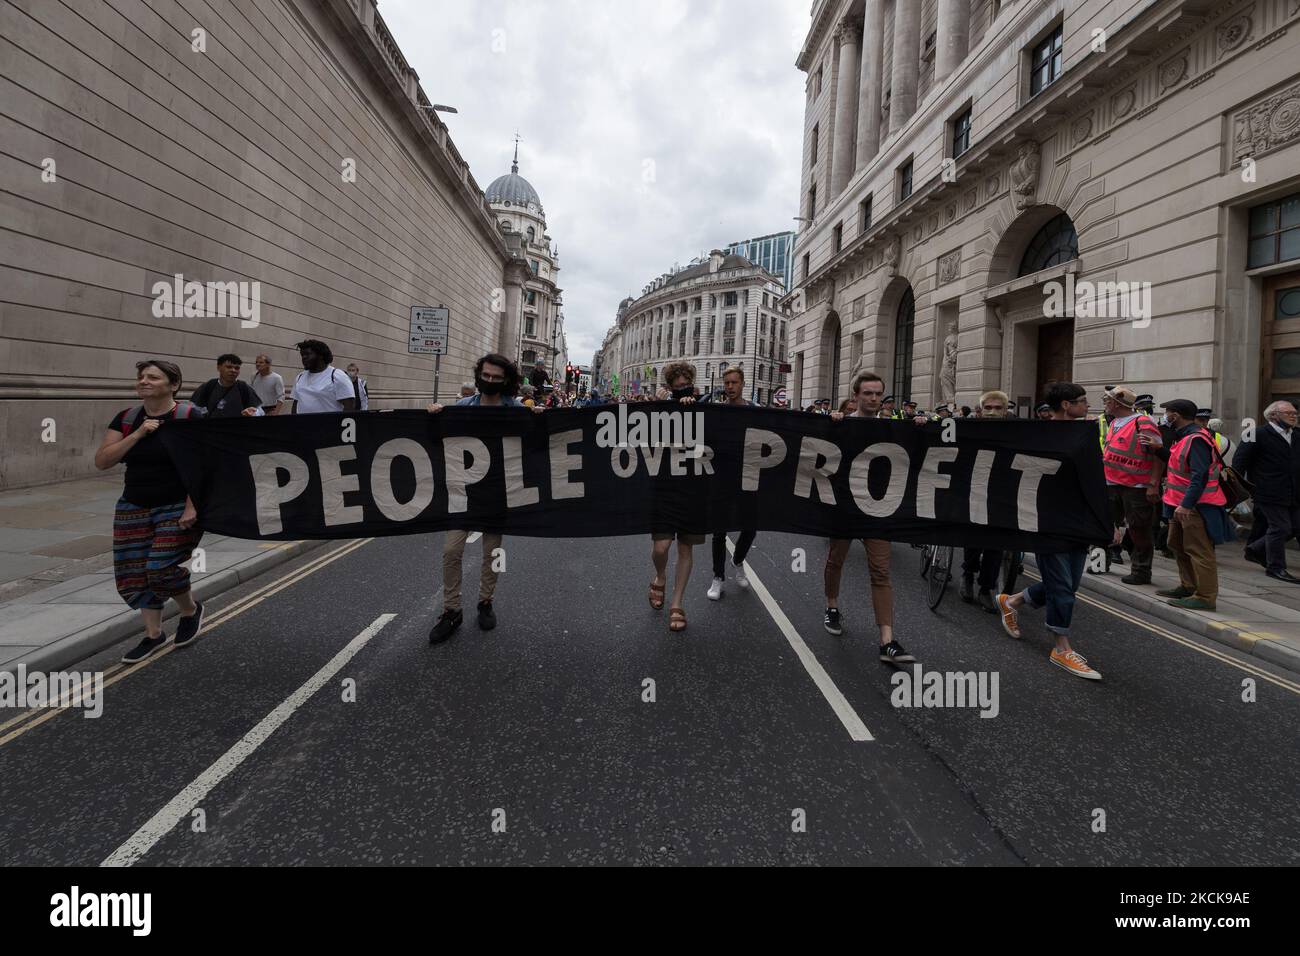 LONDON, UNITED KINGDOM - AUGUST 27, 2021: Environmental activists from Extinction Rebellion march through the City of London in a protest against the companies and institutions that are financing, insuring and enabling major fossil fuel projects and extraction of resources in the developing countries of the Global South, demanding change to the colonial system that drives the crises of climate and racism on 27 August 2021 in London, England. Extinction Rebellion activists target the City of London during the two week 'Impossible Rebellion' action to highlight the role of the UK's financial sec Stock Photo